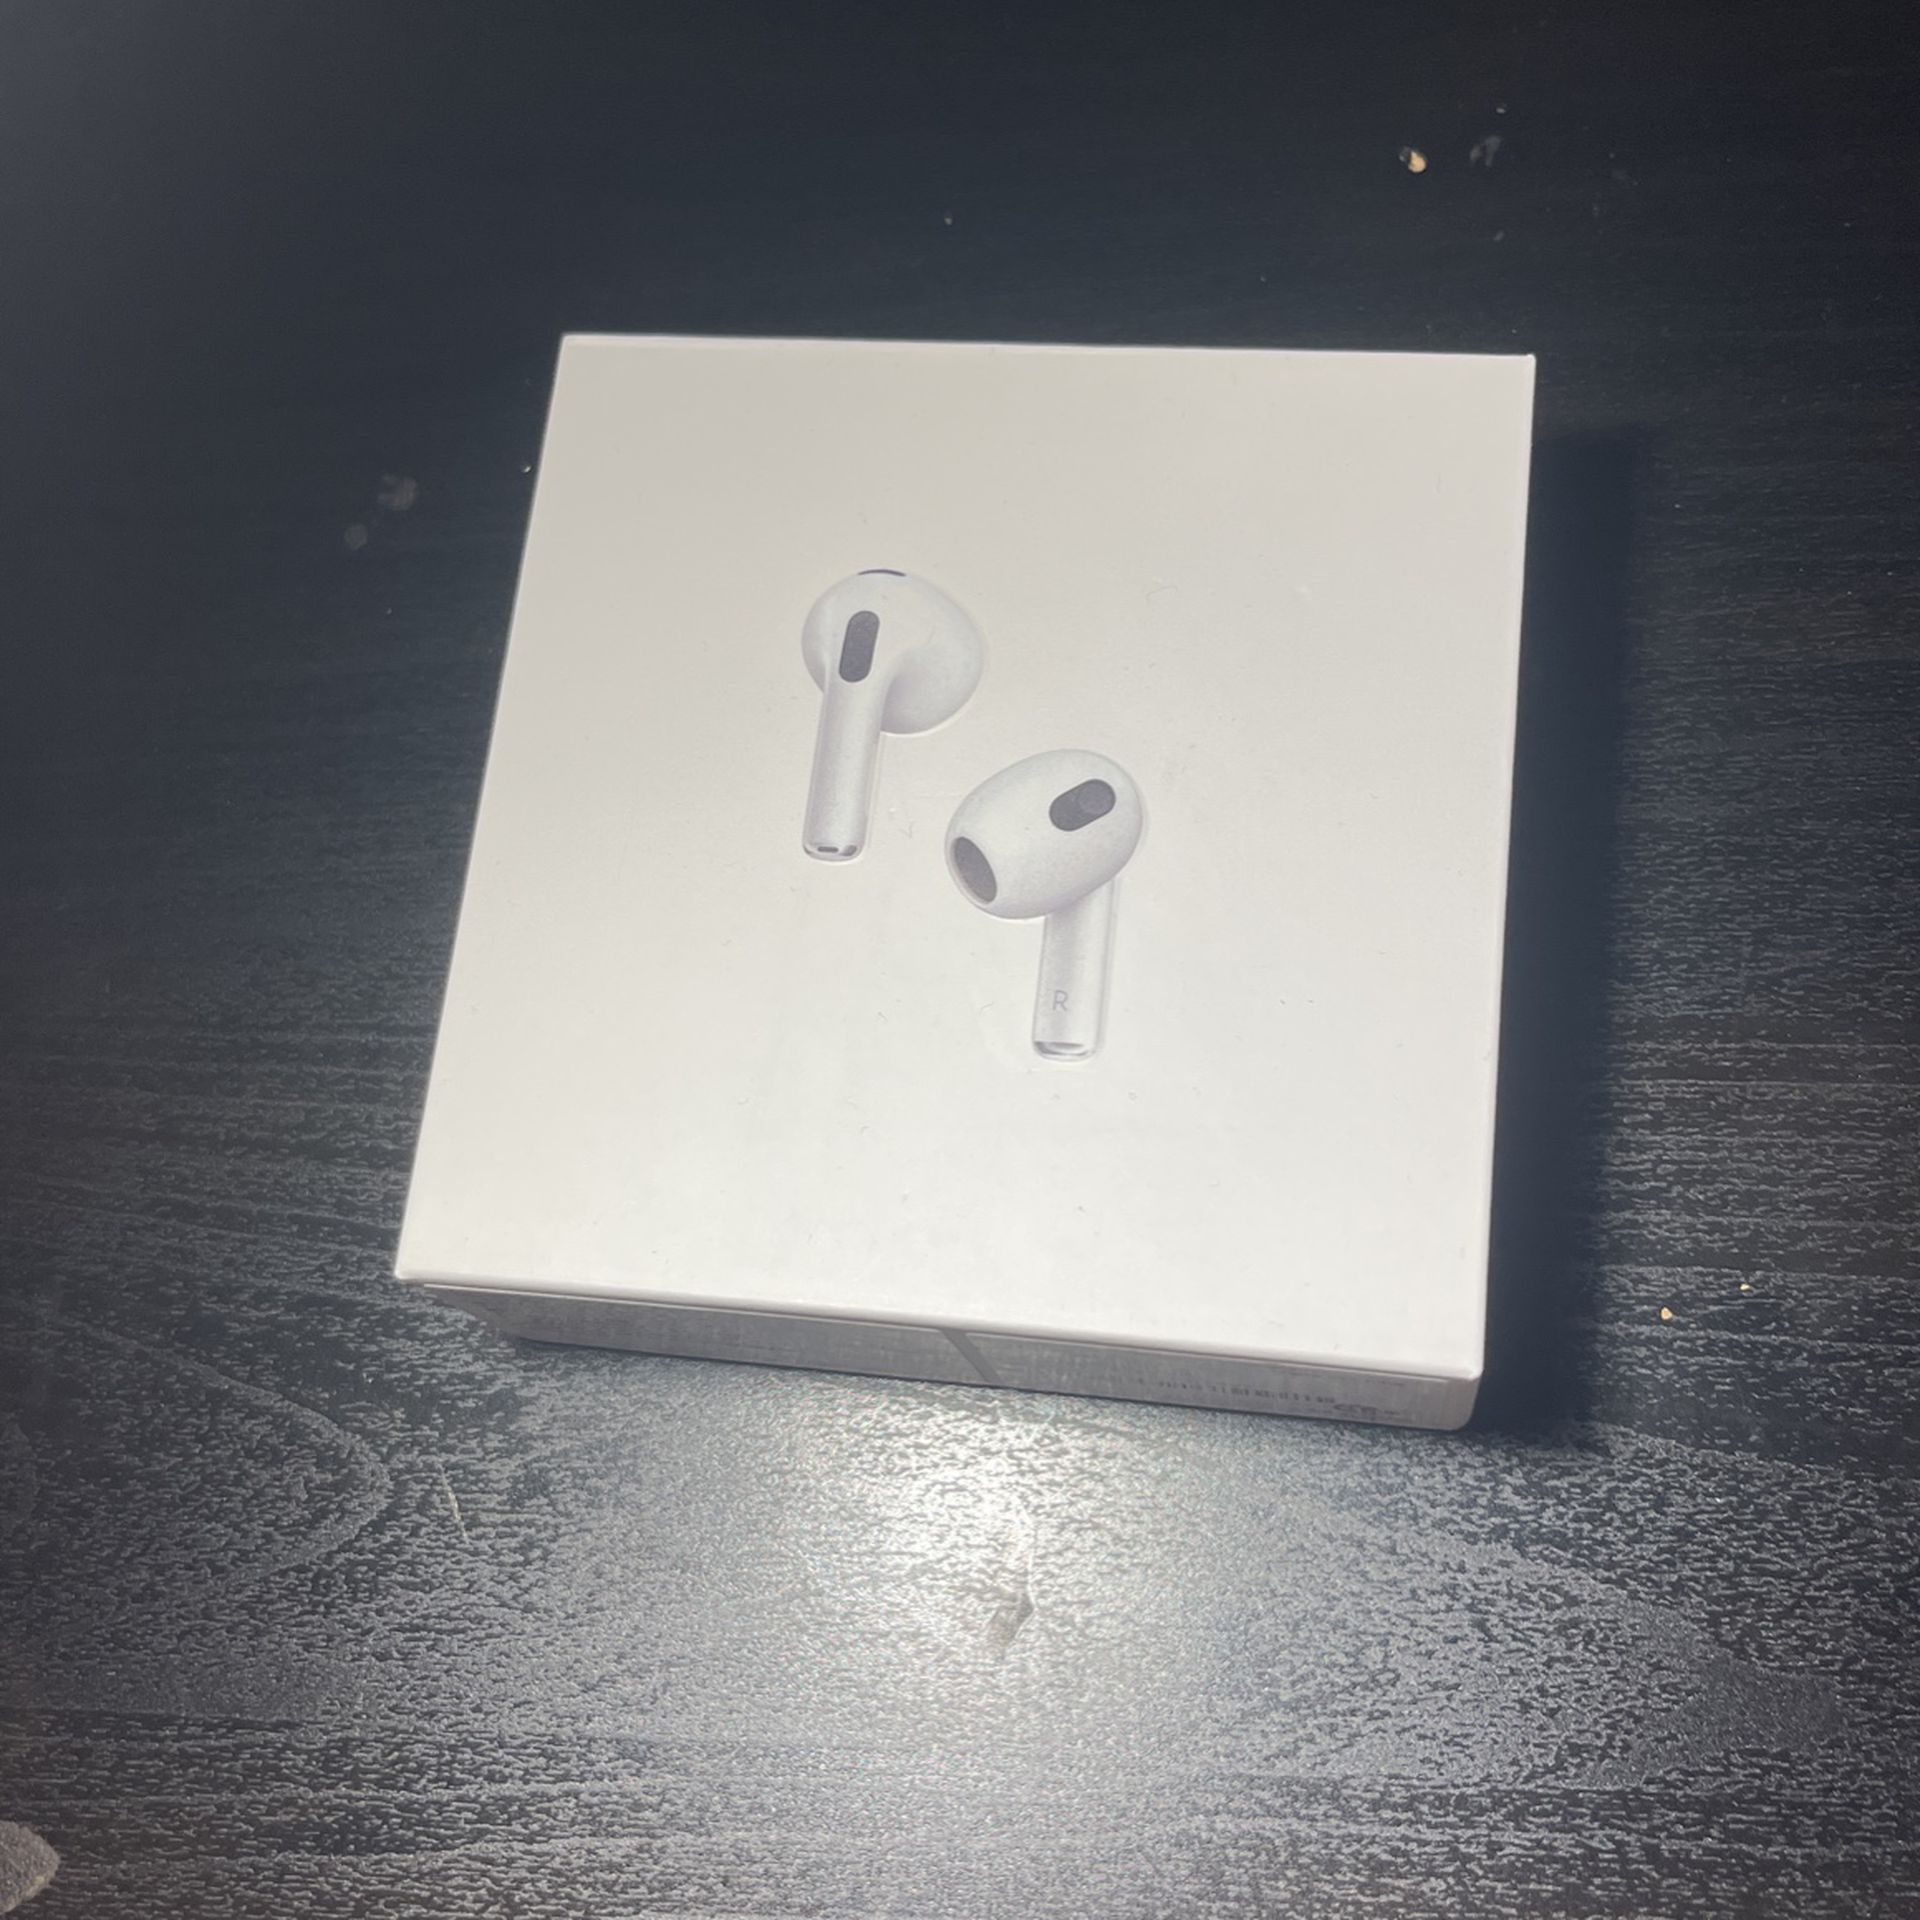 brand new never used airpod gen 3s 